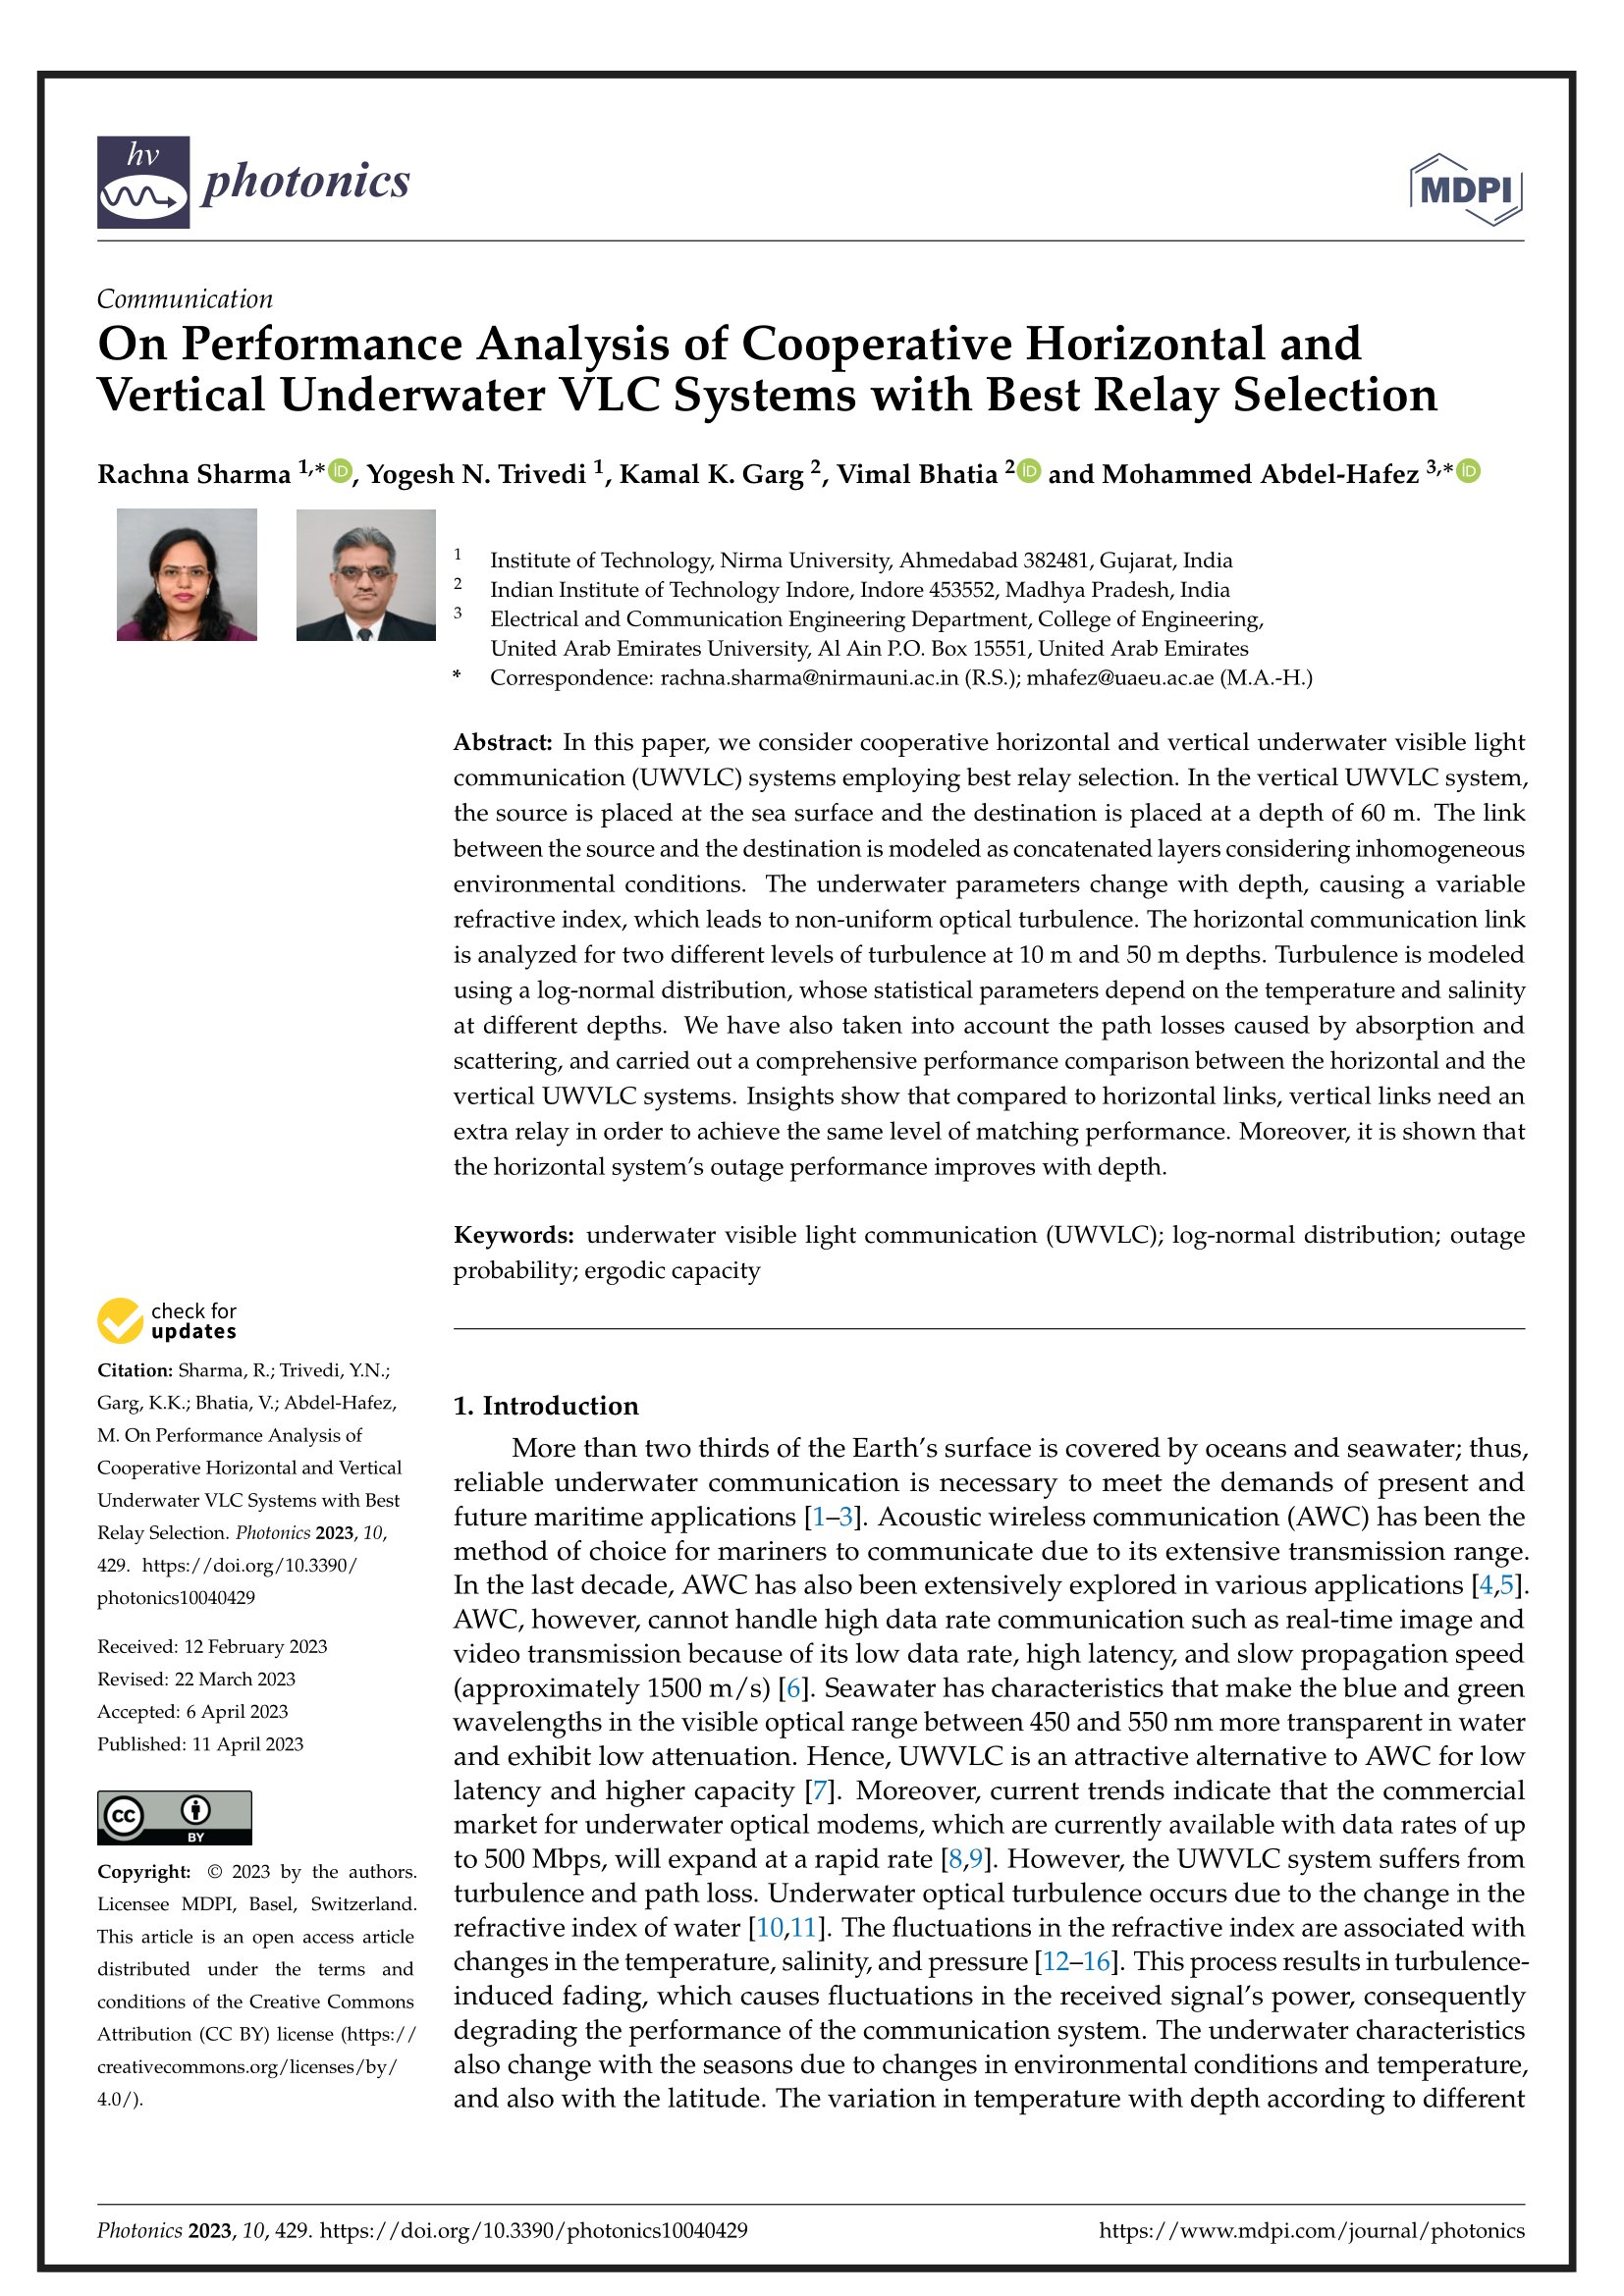 On performance analysis of cooperative horizontal and vertical underwater vlc systems with best relay selection